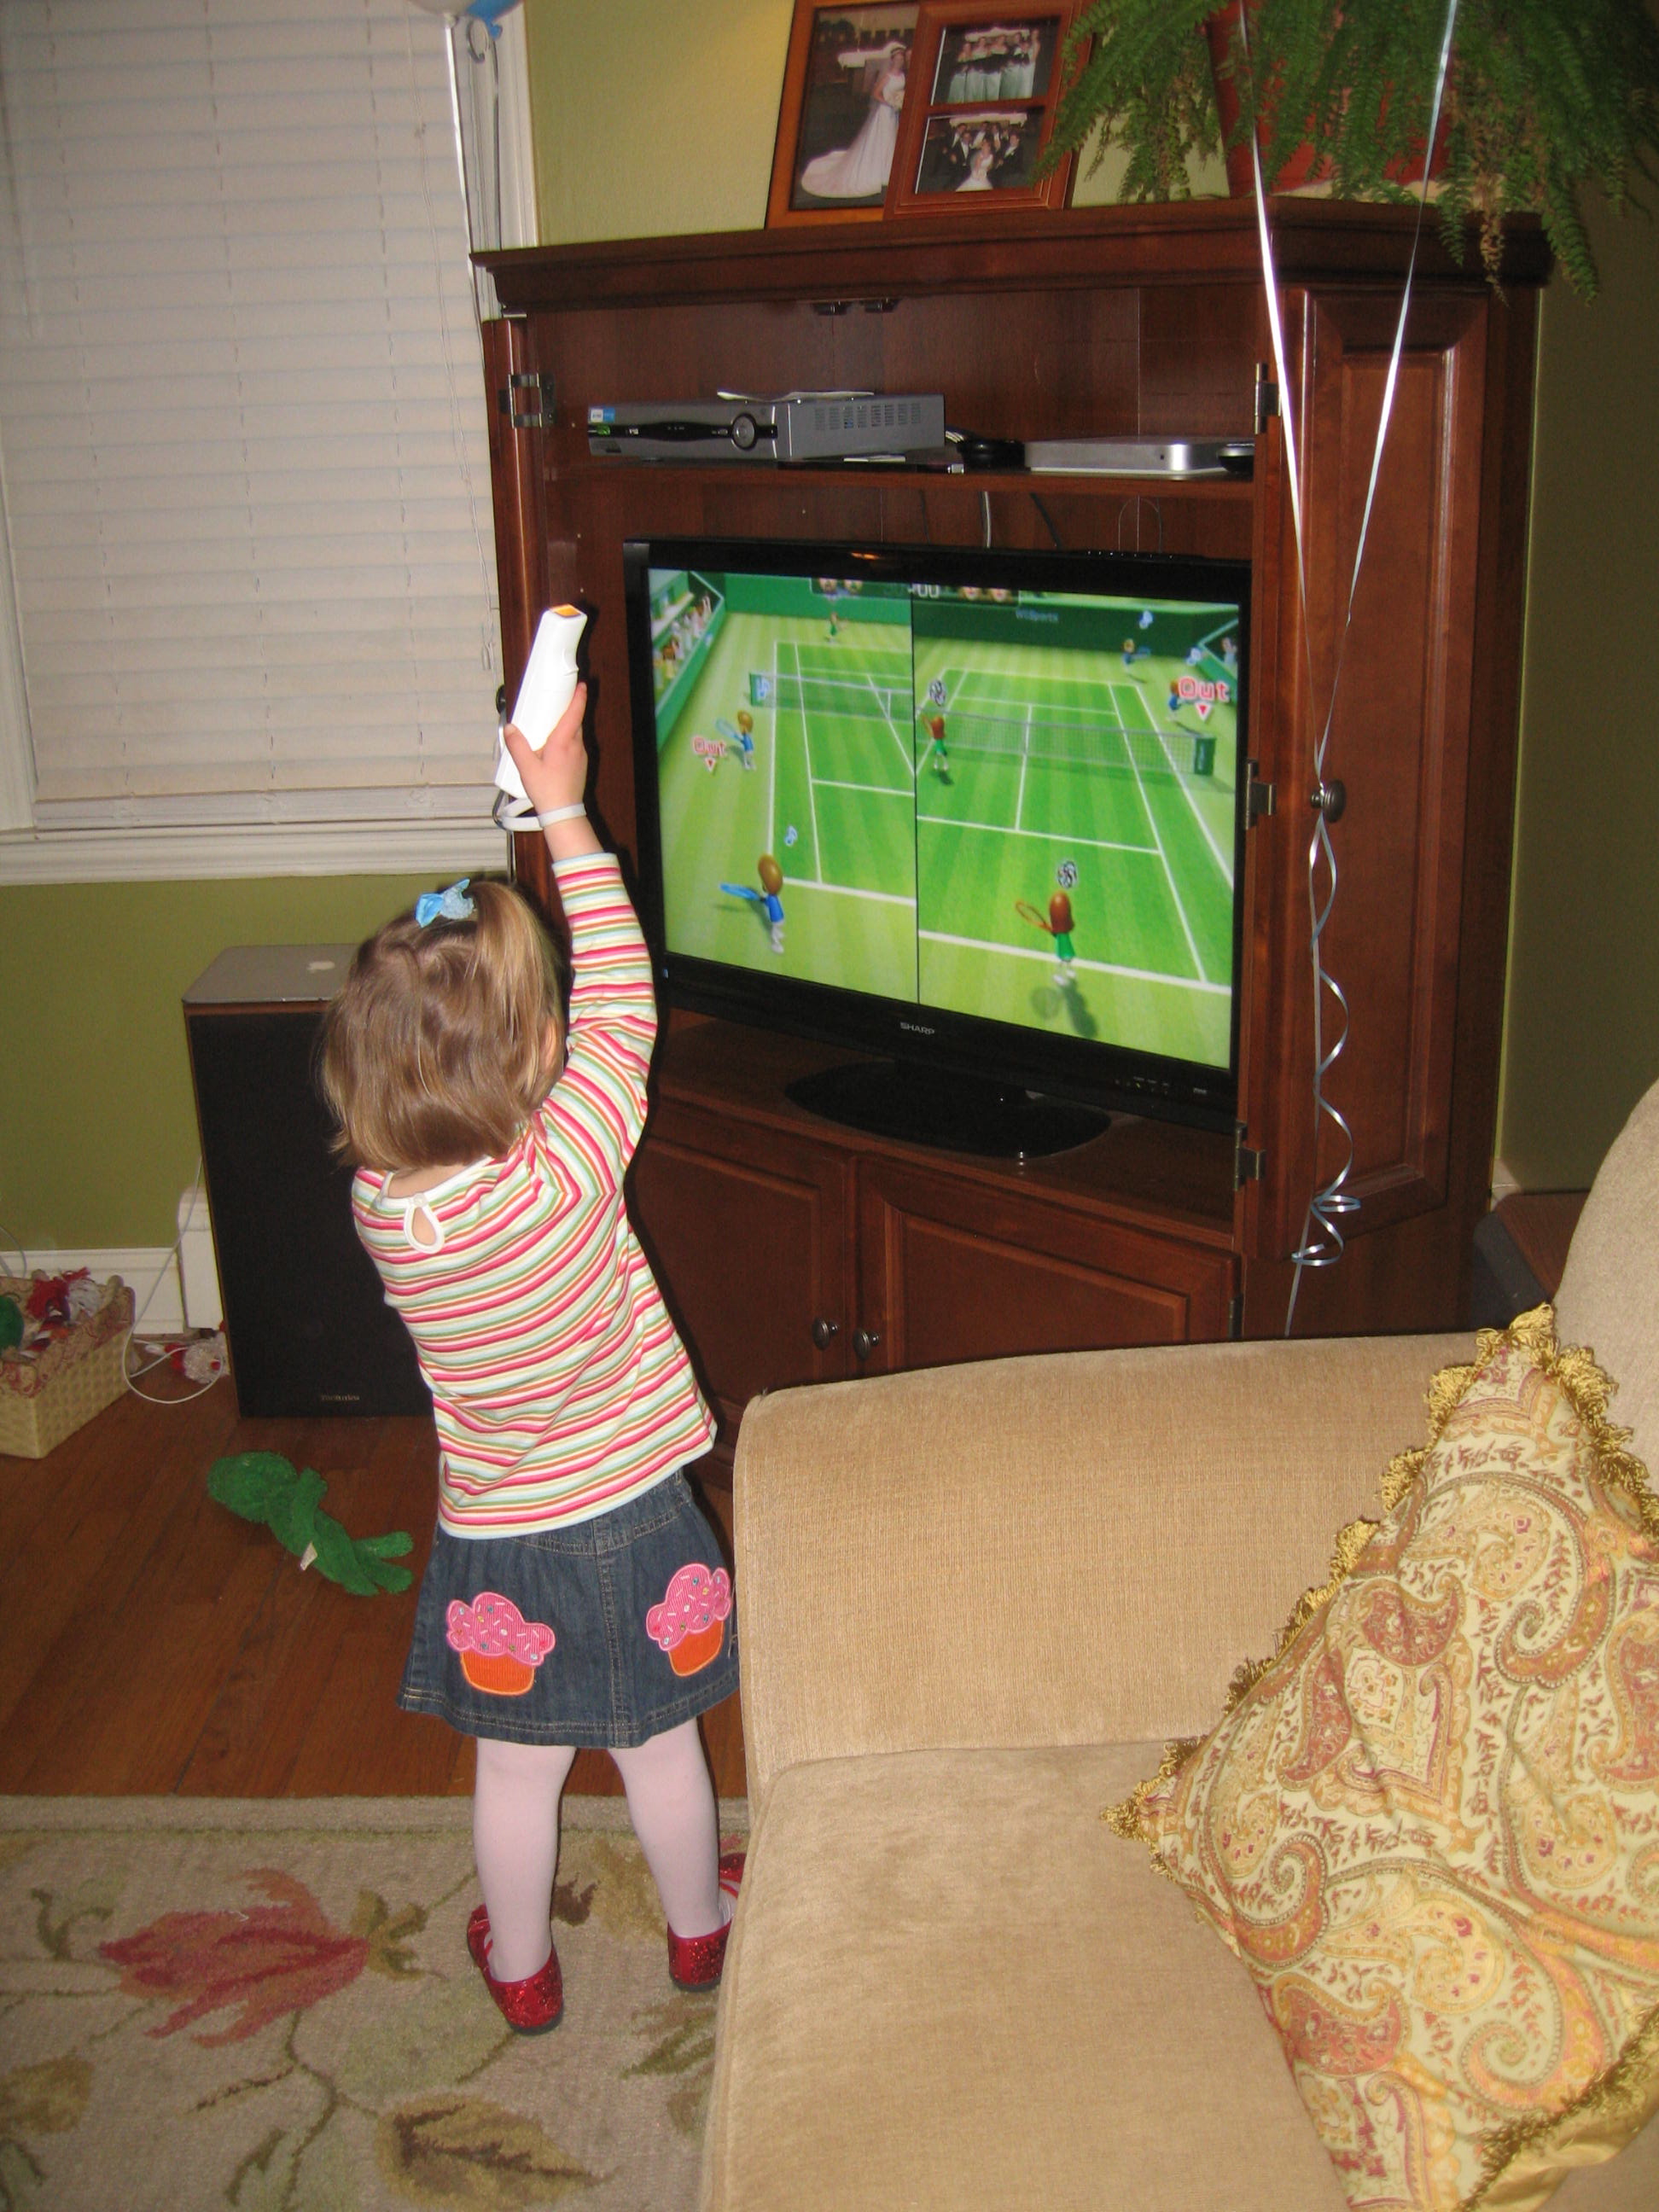 Most Adorable Child Ever playing Wii Tennis